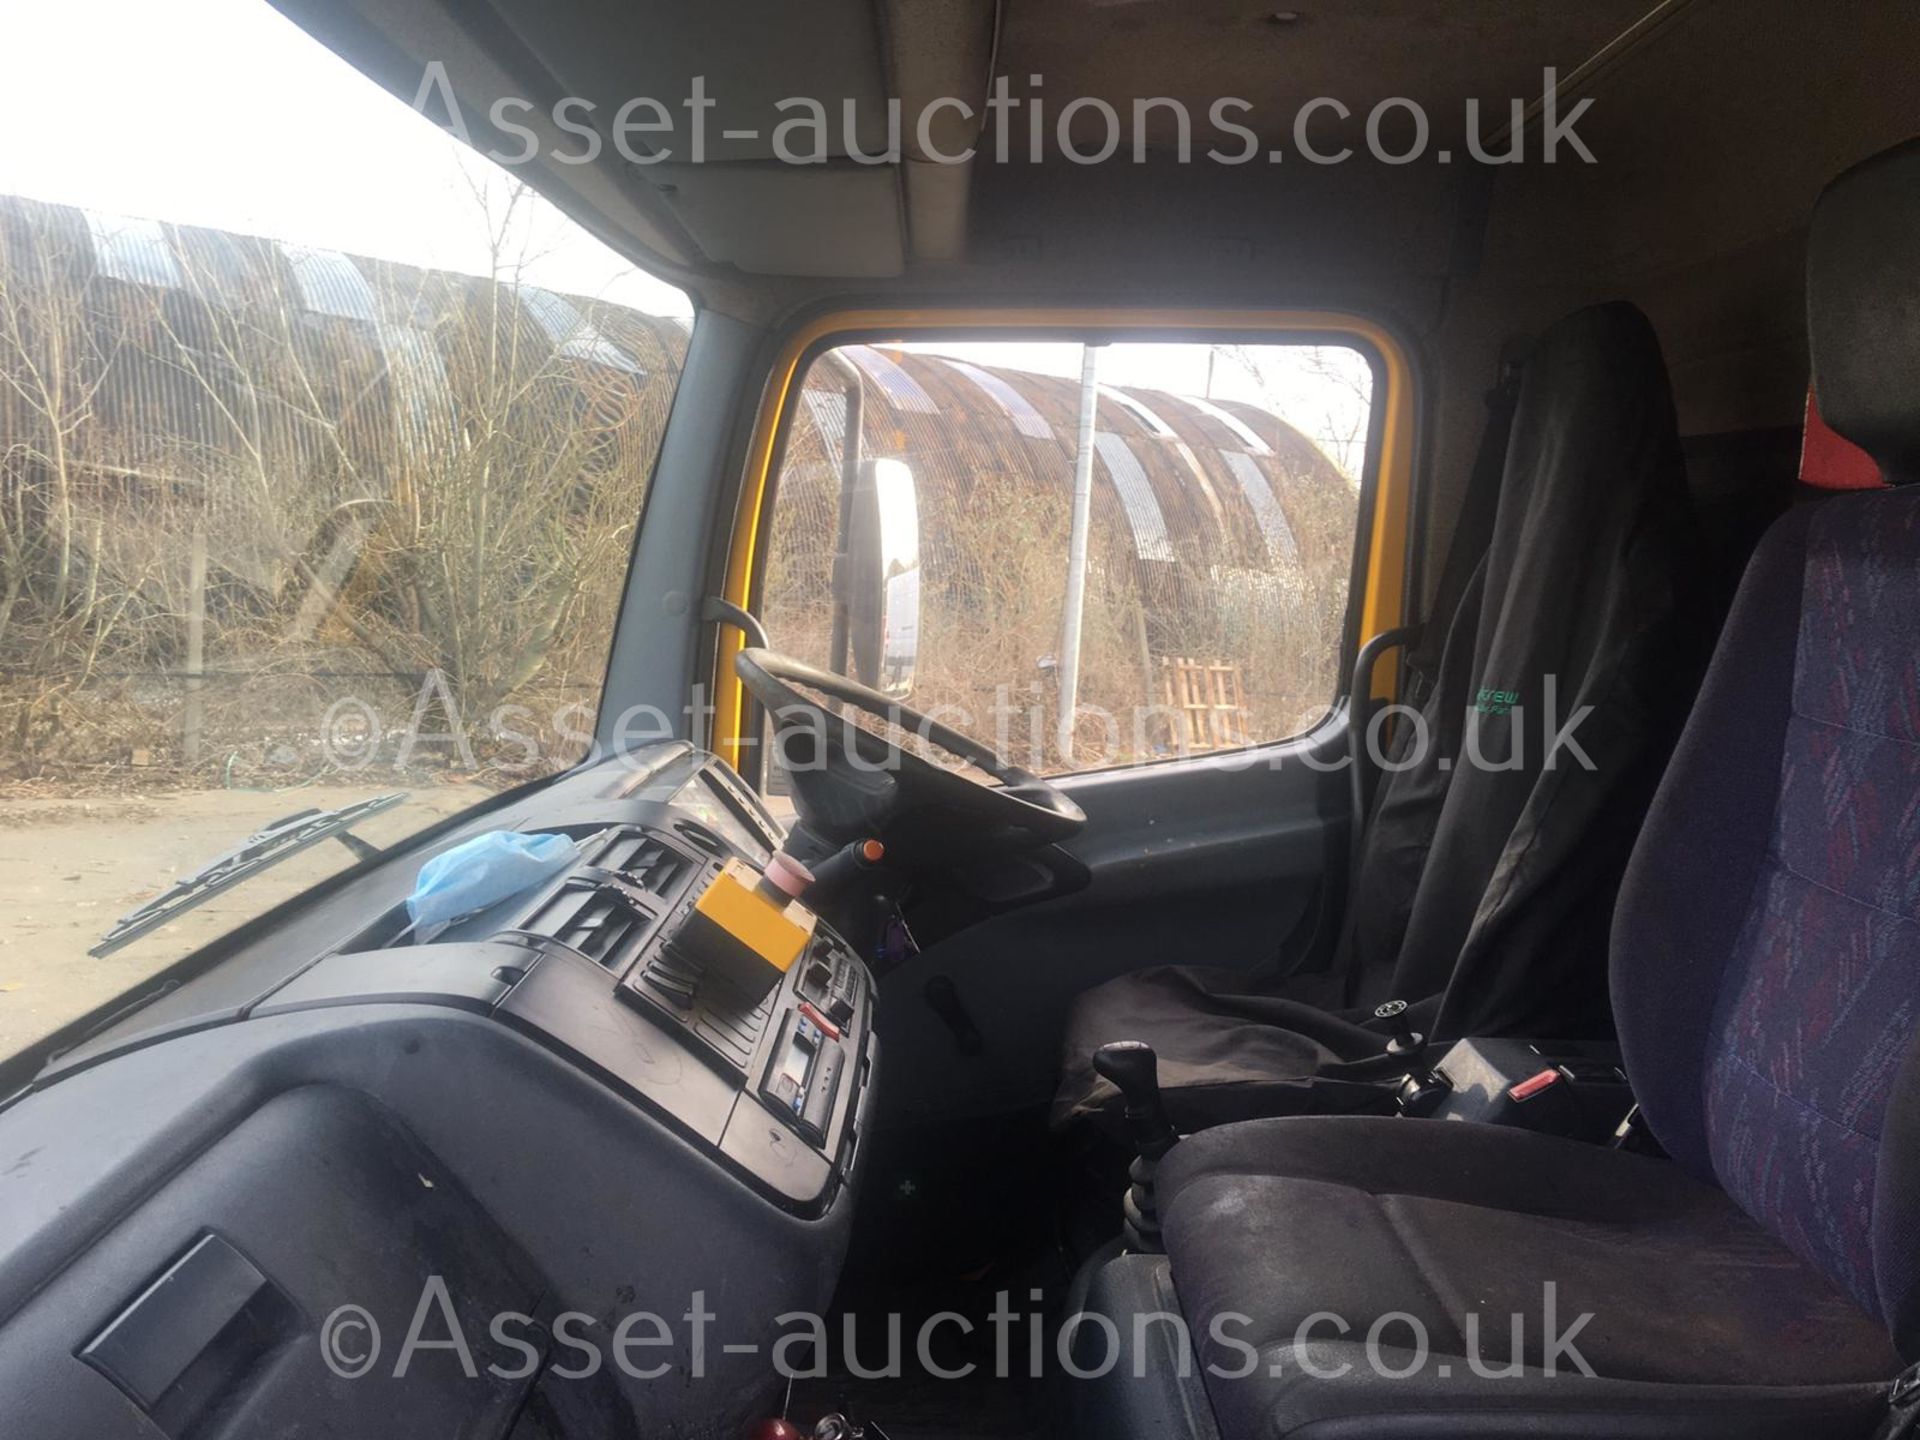 2004/54 REG MERCEDES ATEGO 1018 DAY YELLOW DROPSIDE LINE PAINTING LORRY 4.3L DIESEL ENGINE *NO VAT* - Image 55 of 128